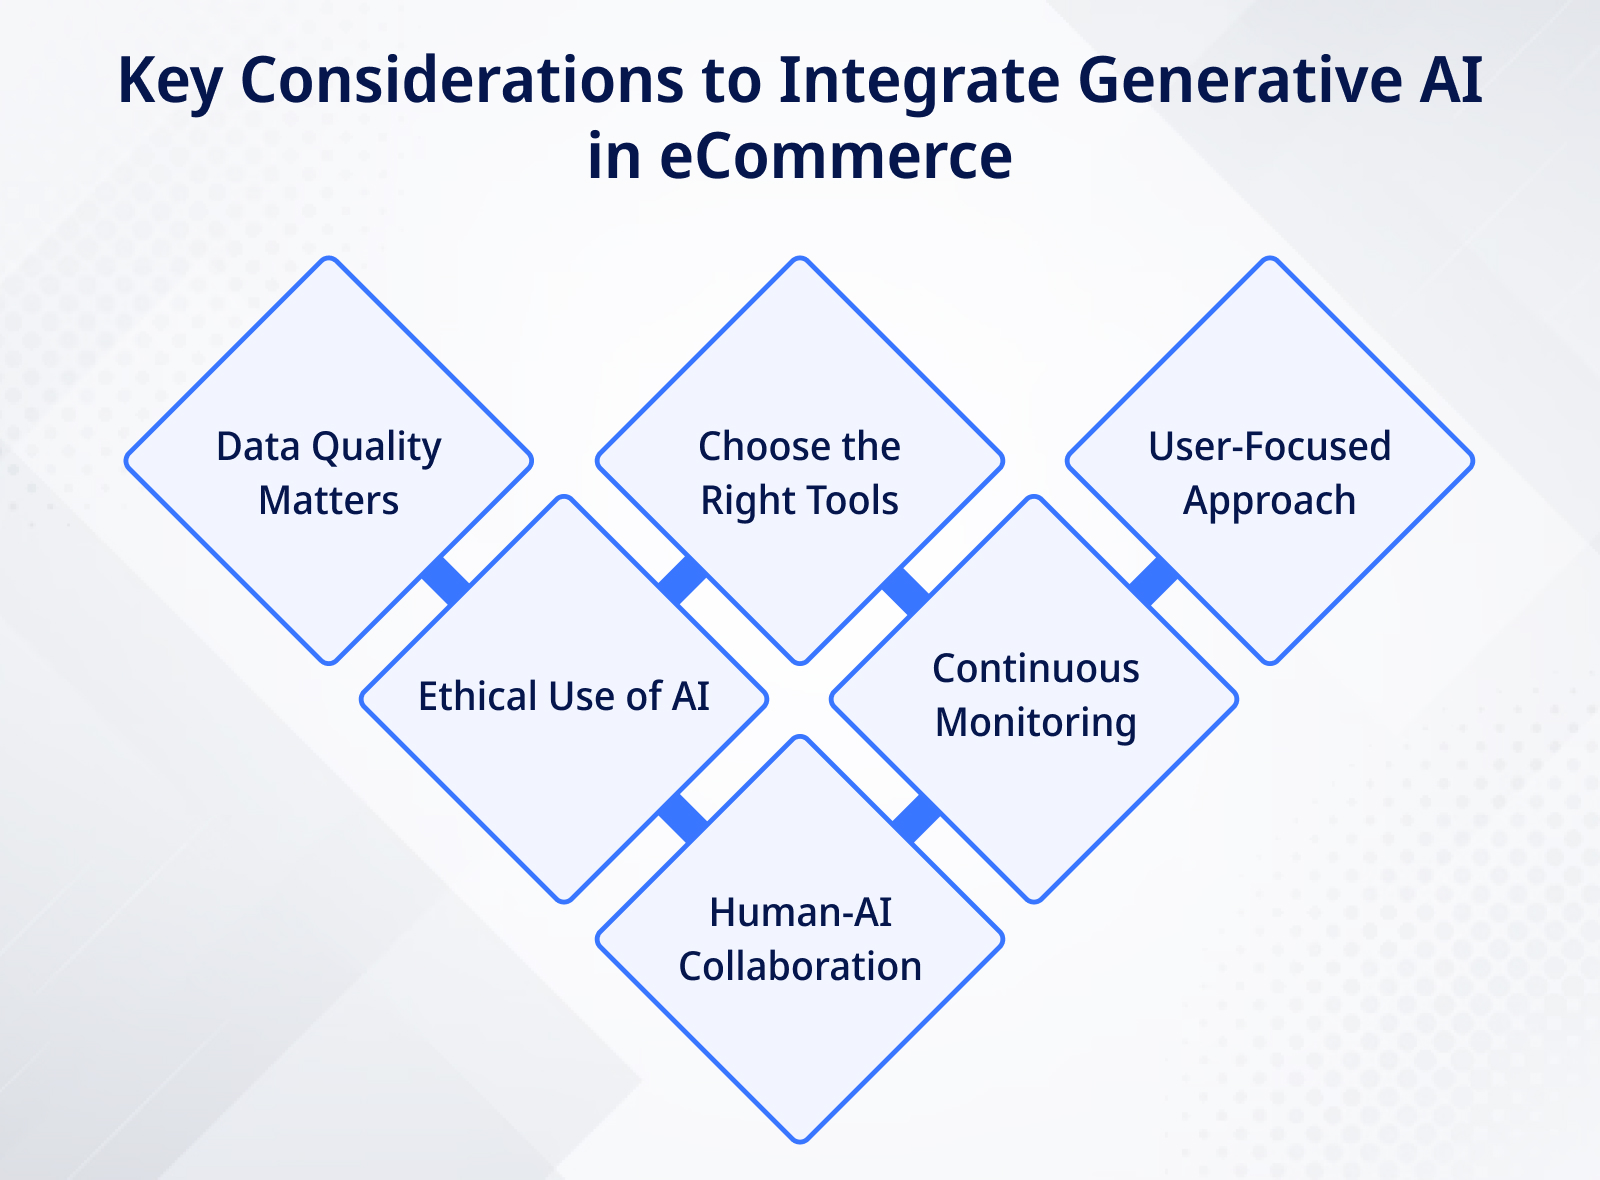 Key Considerations to Integrate Generative AI in eCommerce